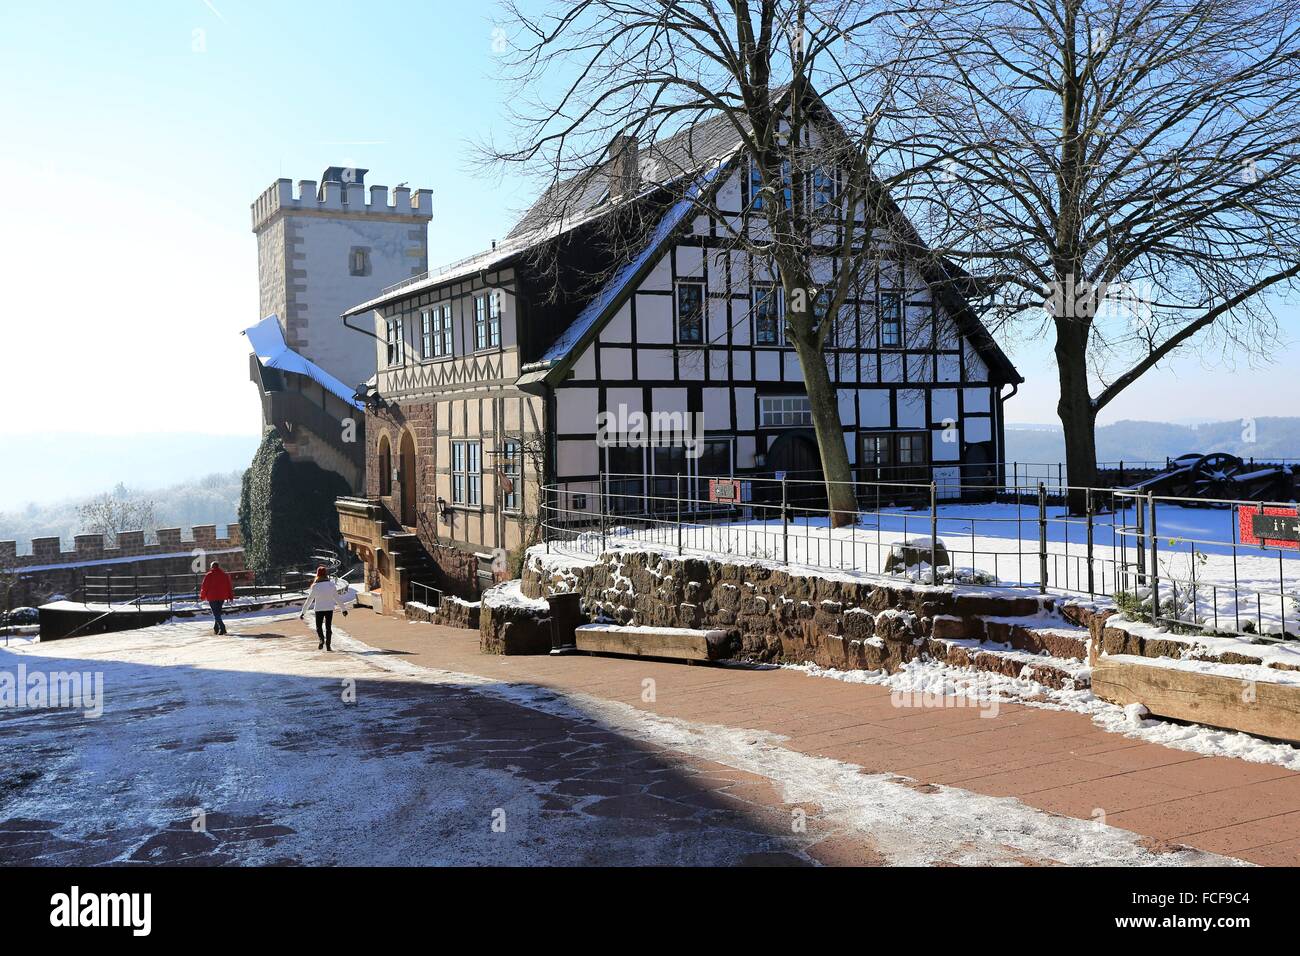 View on Courtyard with South Tower of Wartburg. The Wartburg in Eisenach was built around 1067. Now it is a UNESCO World Heritage Site. The Wartburg became famous through the countess Elisabeth and Martin Luther. Date: January 19, 2016 Stock Photo